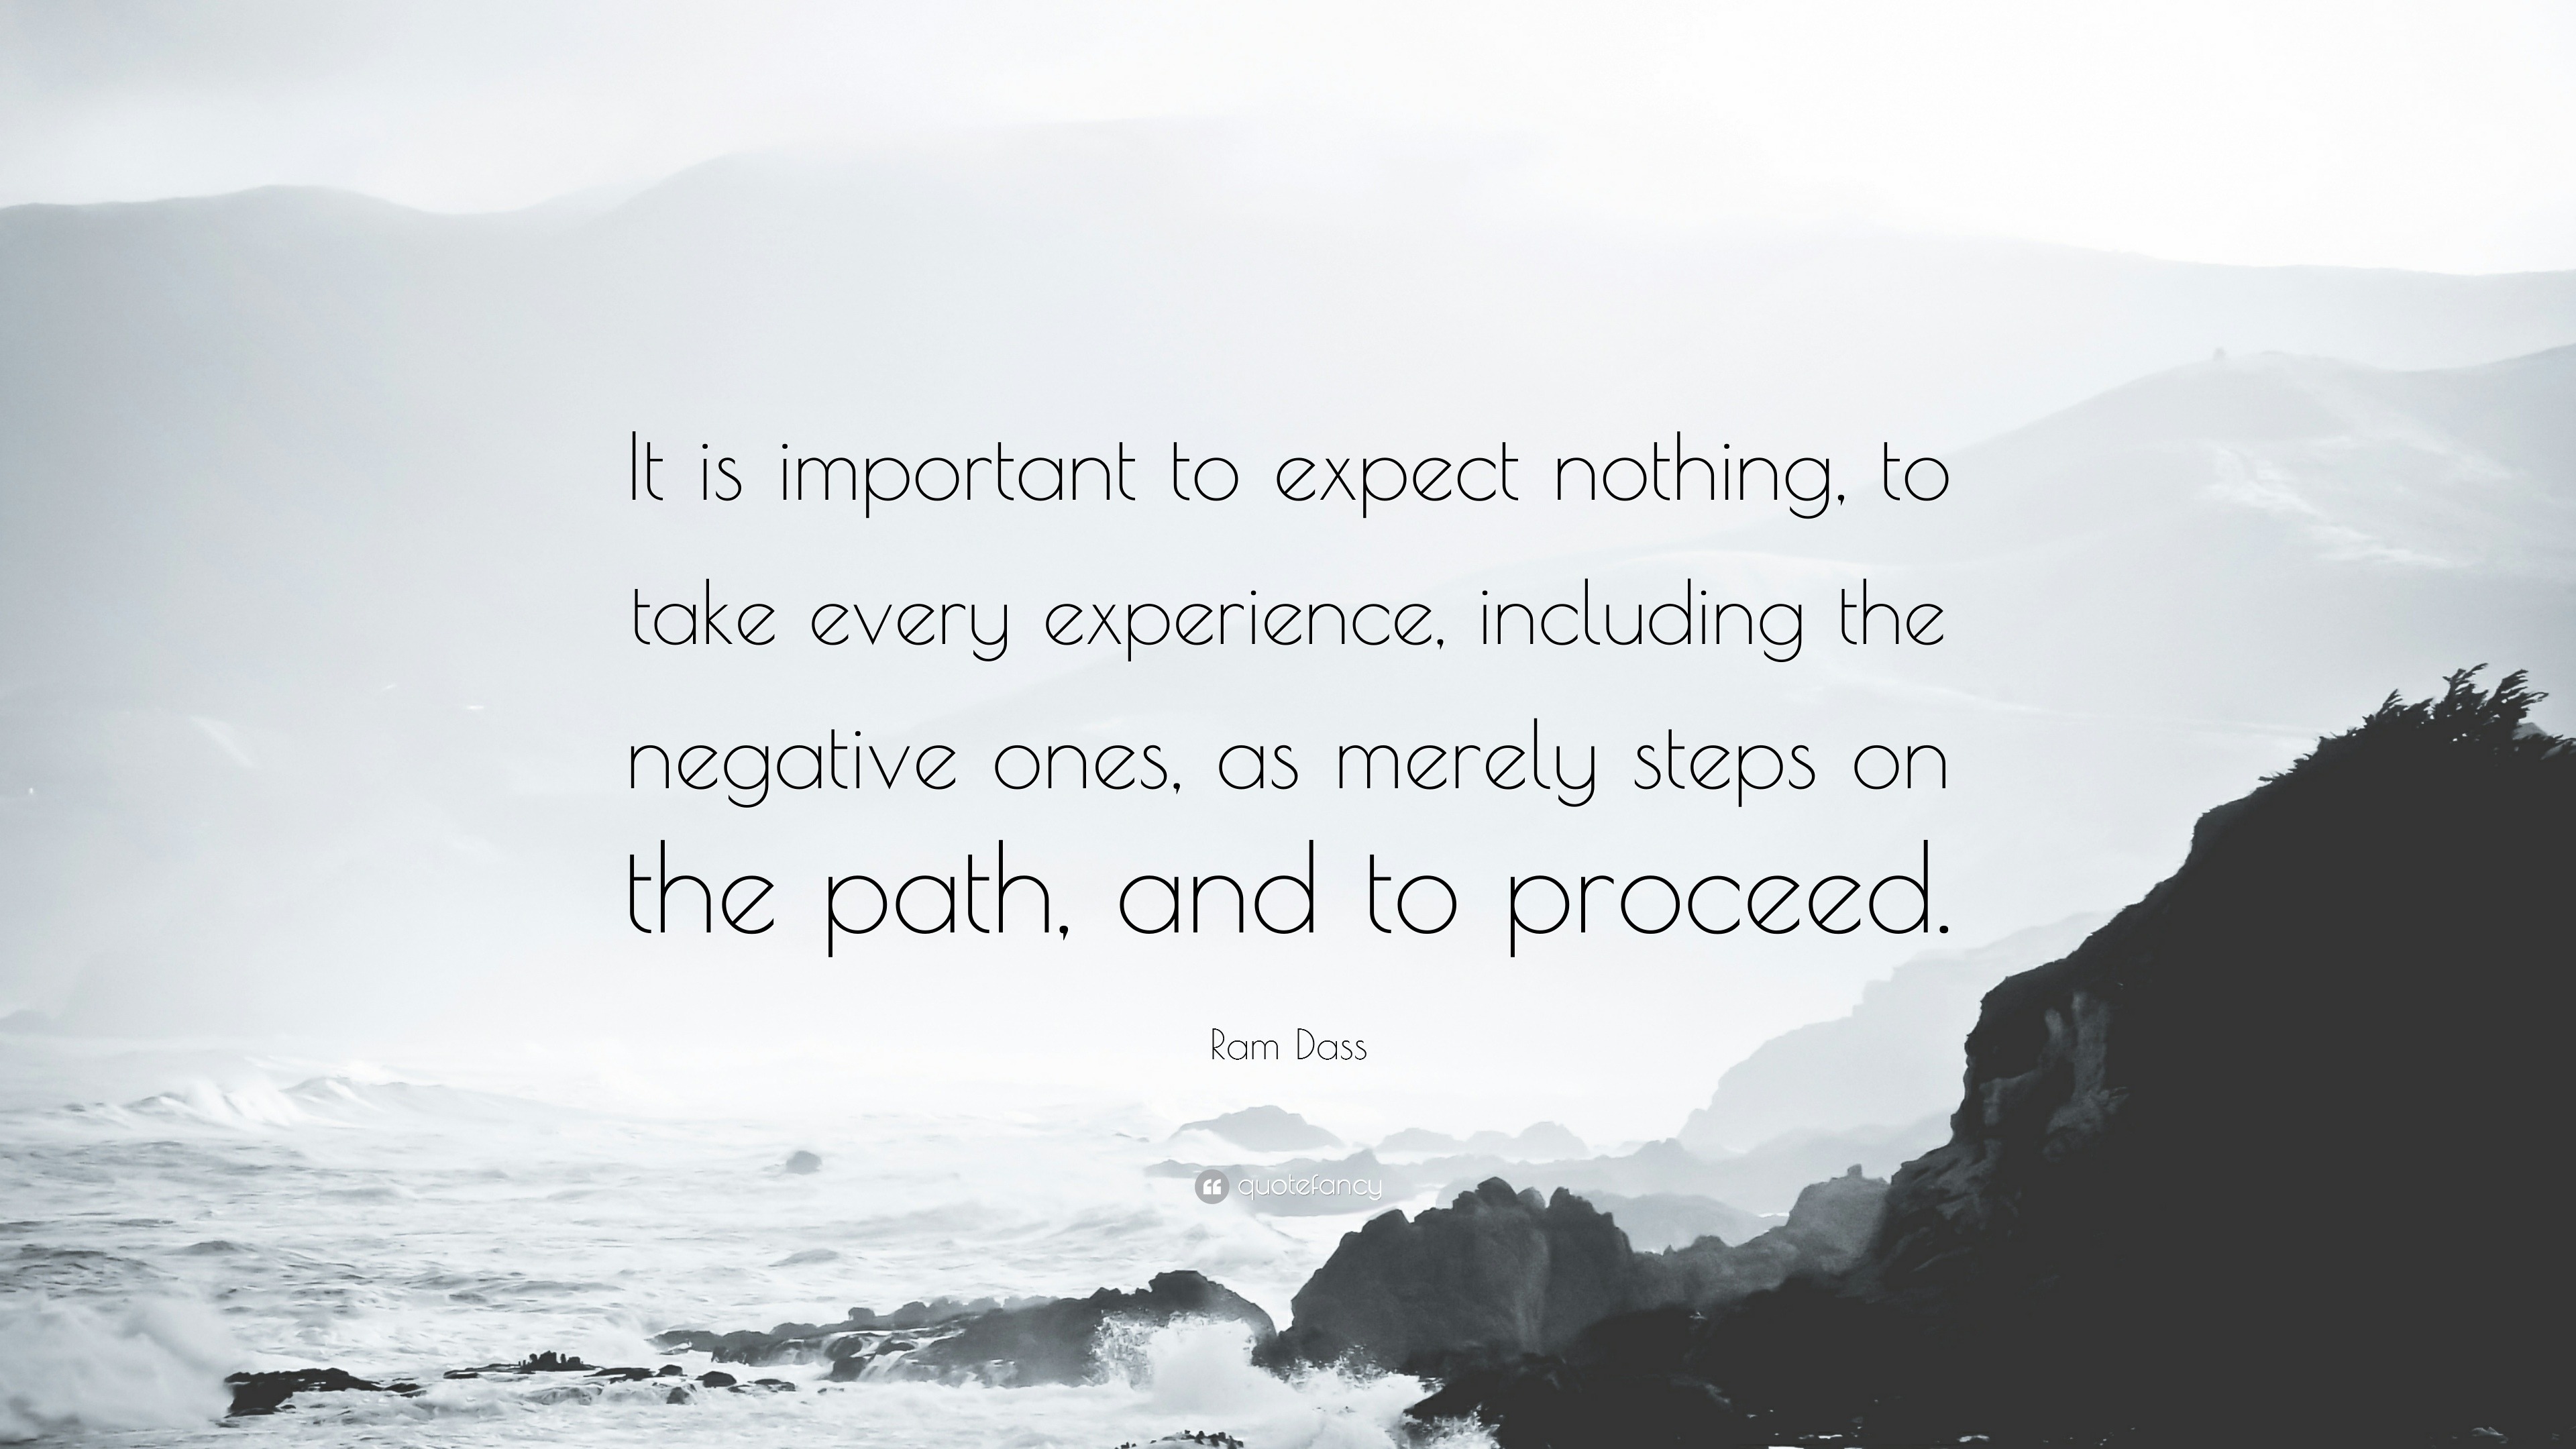 Beskrivelse krig Behandle Ram Dass Quote: “It is important to expect nothing, to take every  experience, including the negative ones, as merely steps on the path, a...”